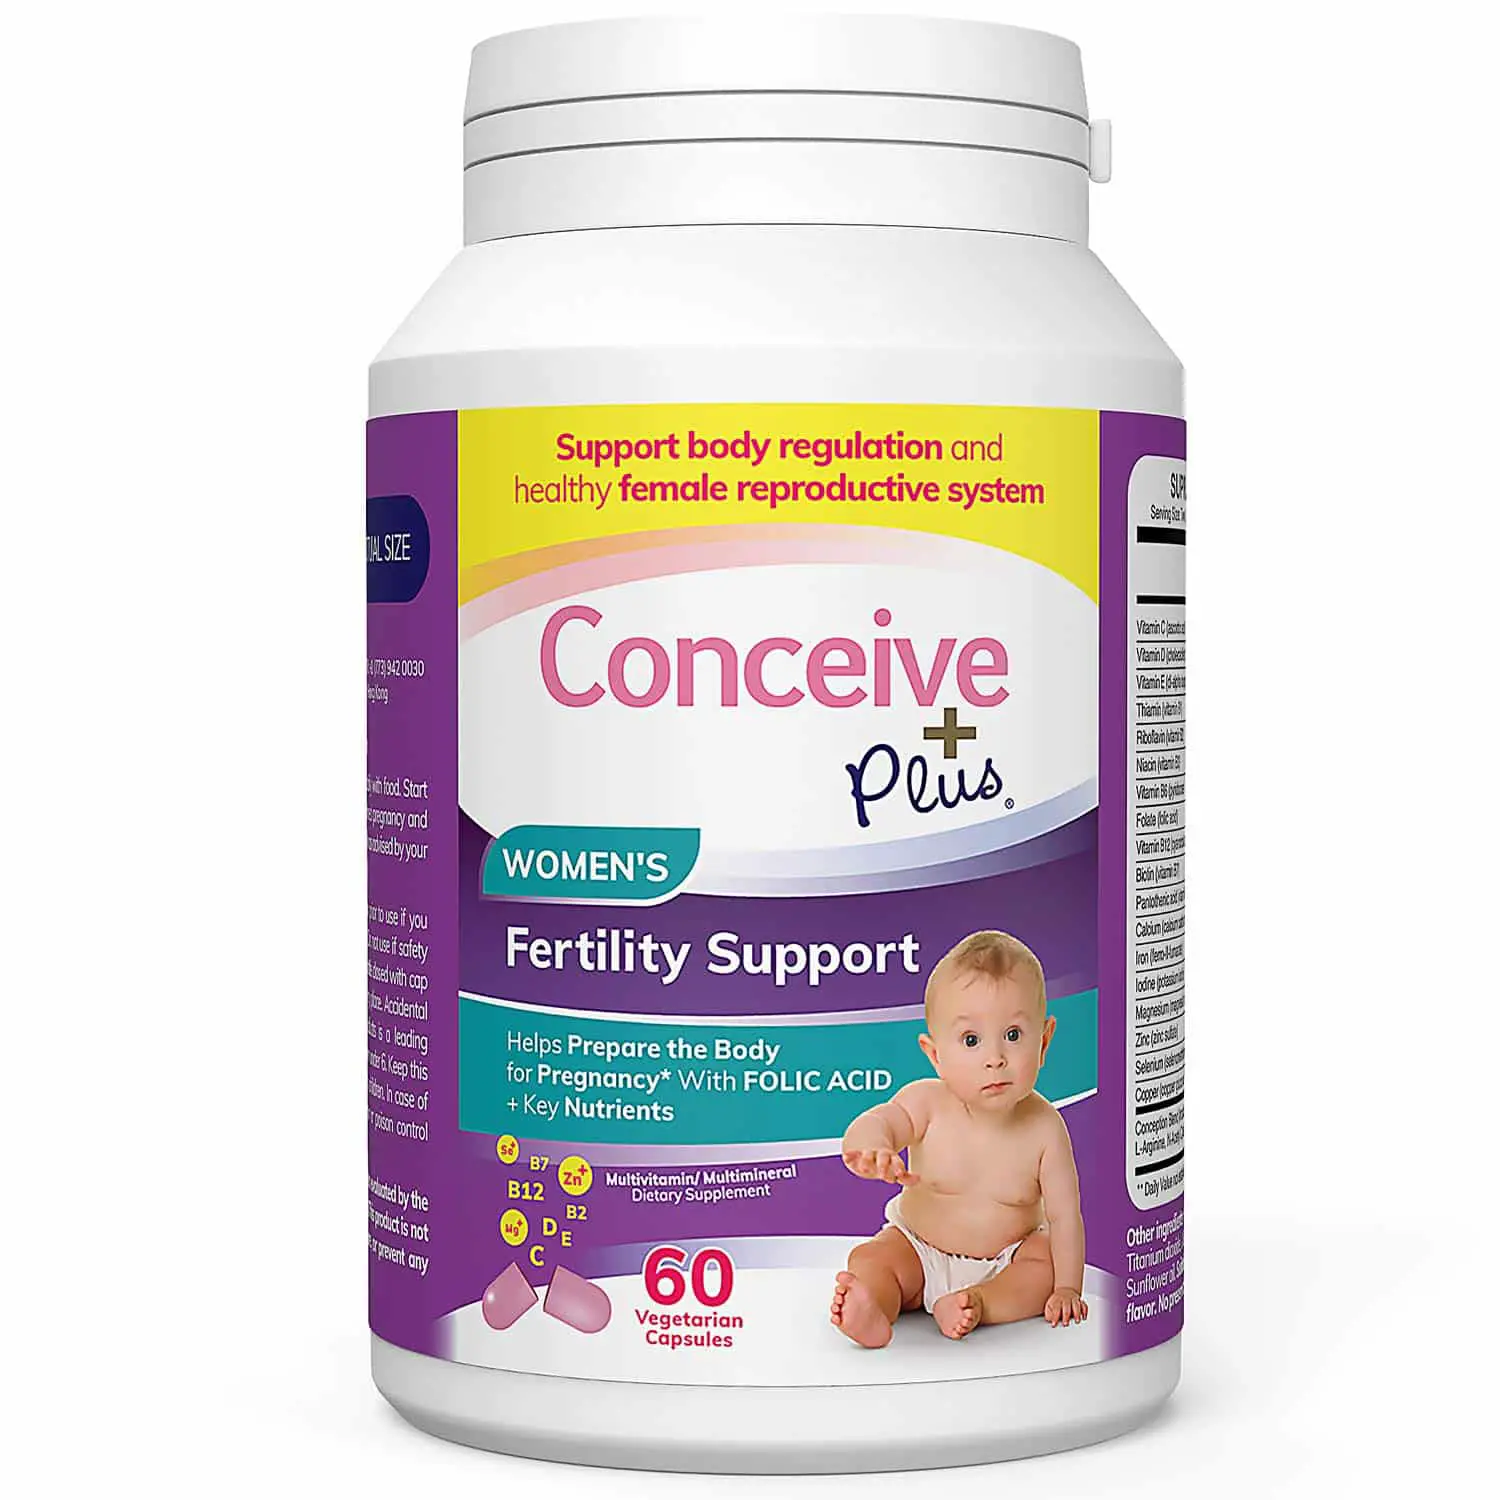 abekdesignco: Can Taking Prenatal Vitamins Help With Conception